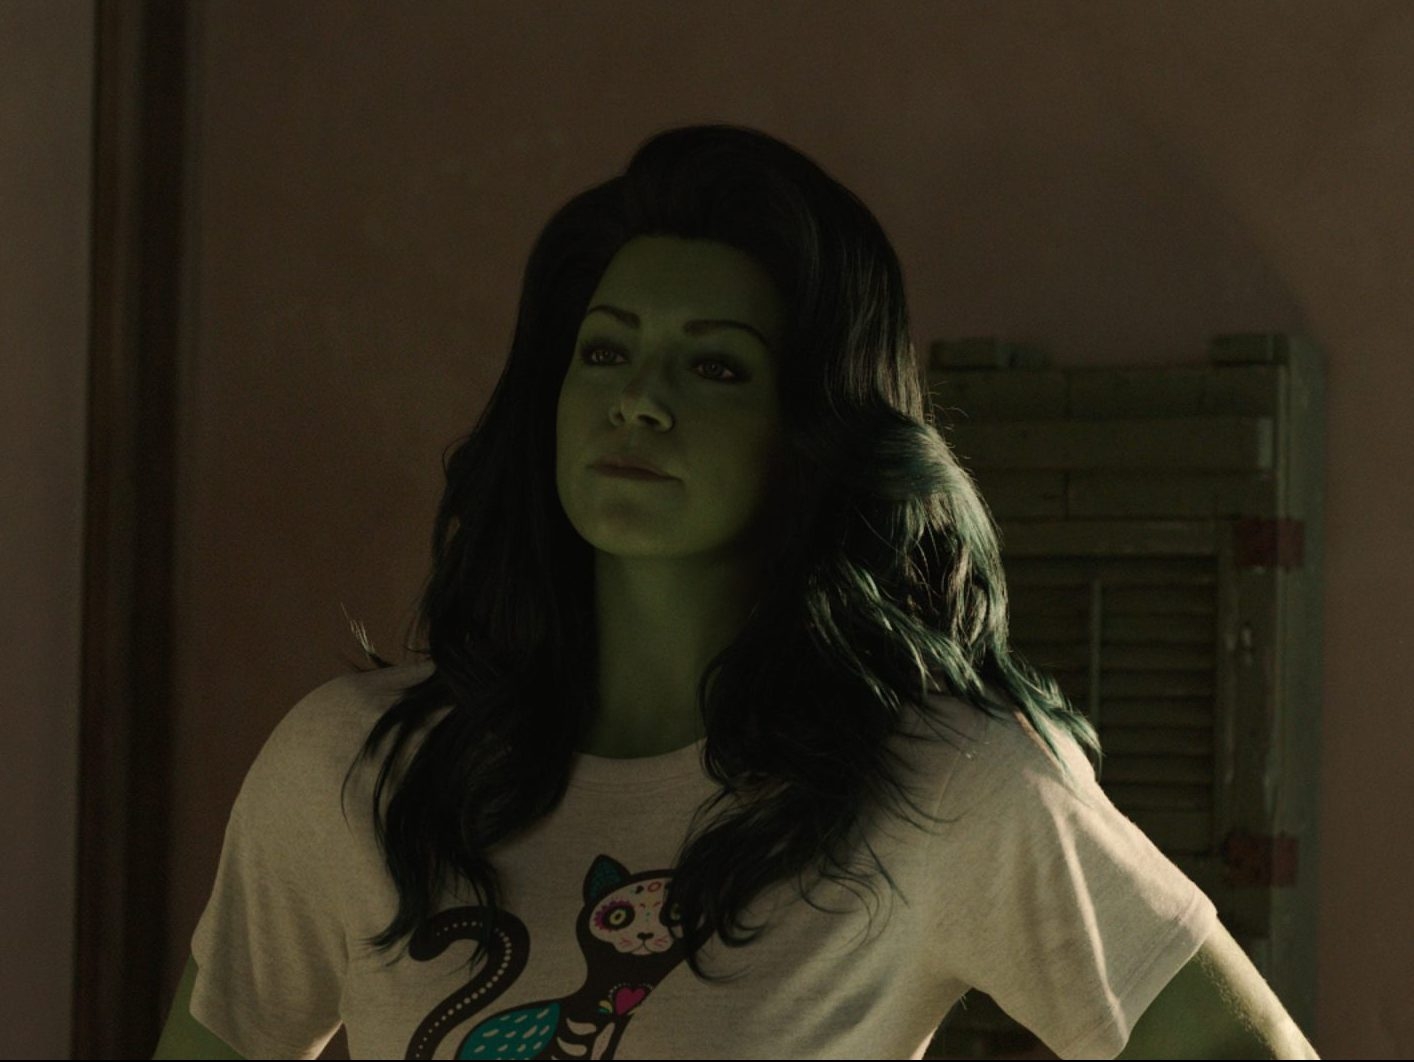 Marvel's She-Hulk, Walking Dead spinoff top this week's TV must-sees ...